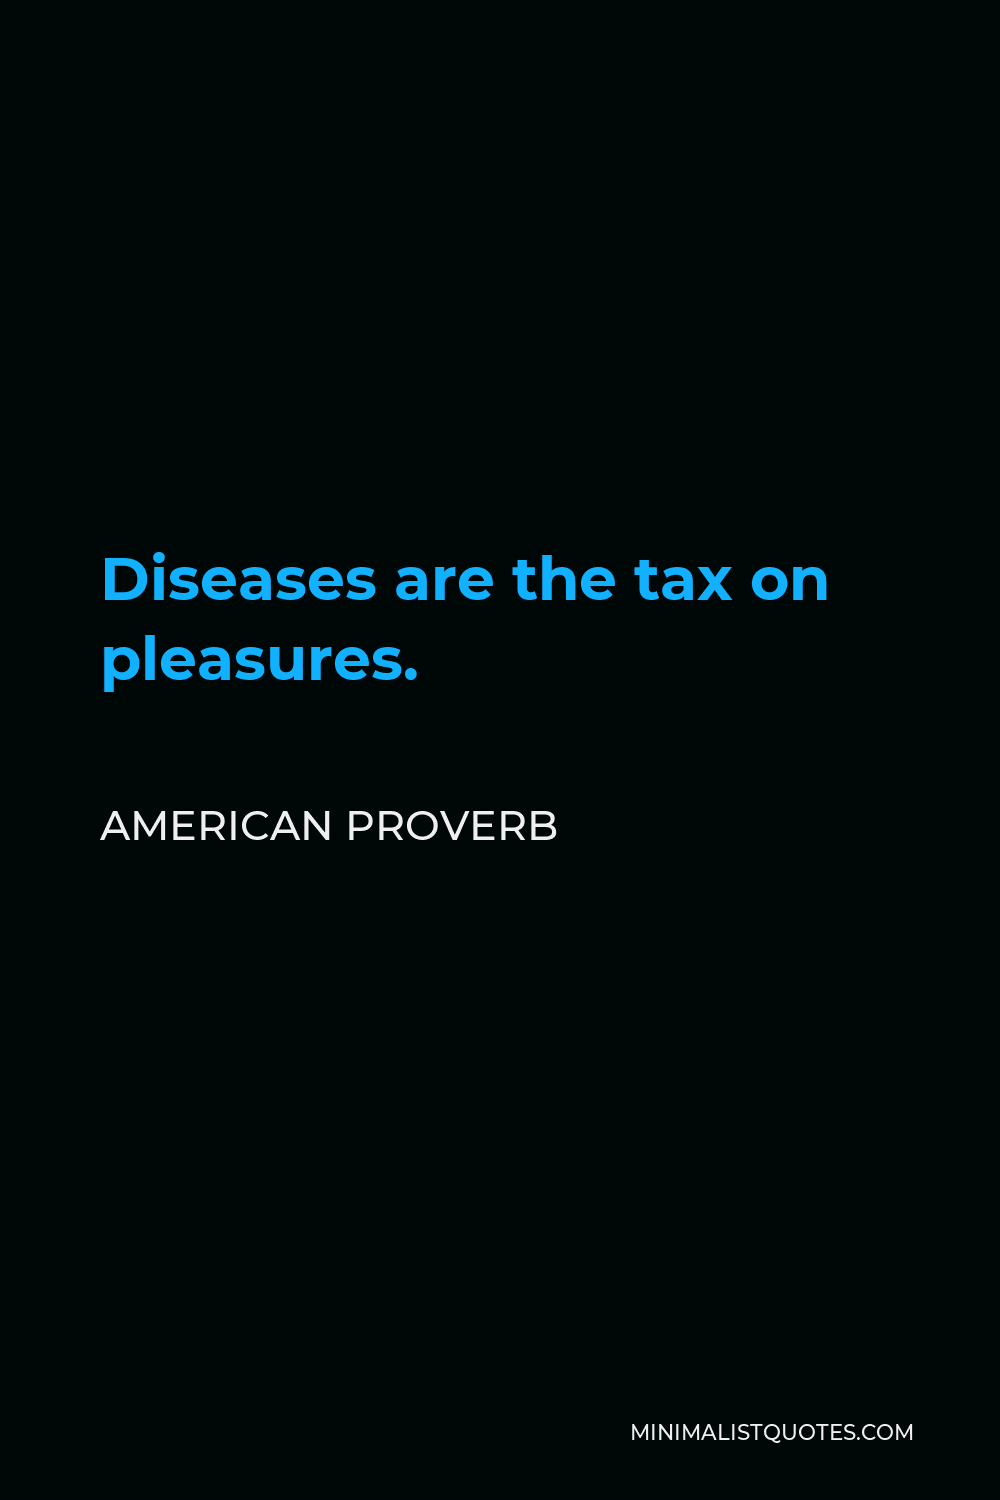 American Proverb Quote - Diseases are the tax on pleasures.